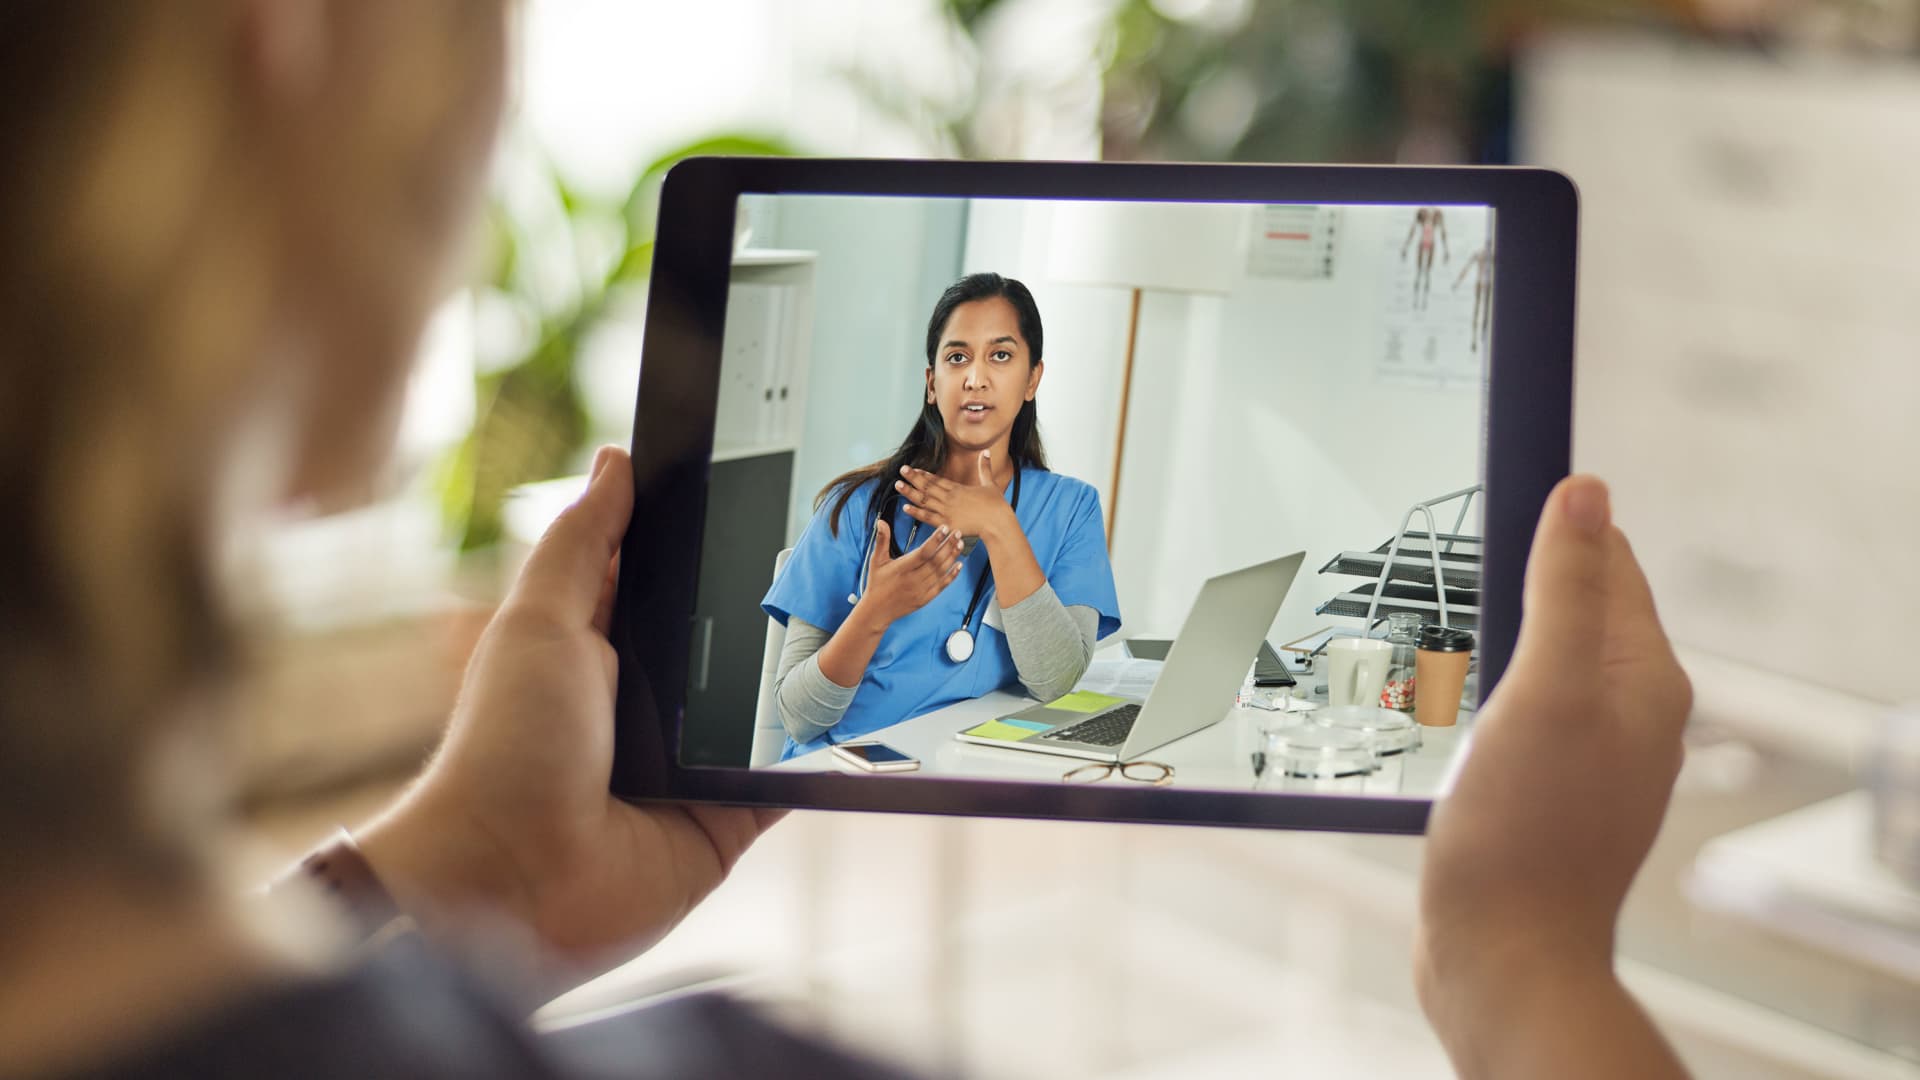 Medicare telehealth would be extended under bill poised for House vote